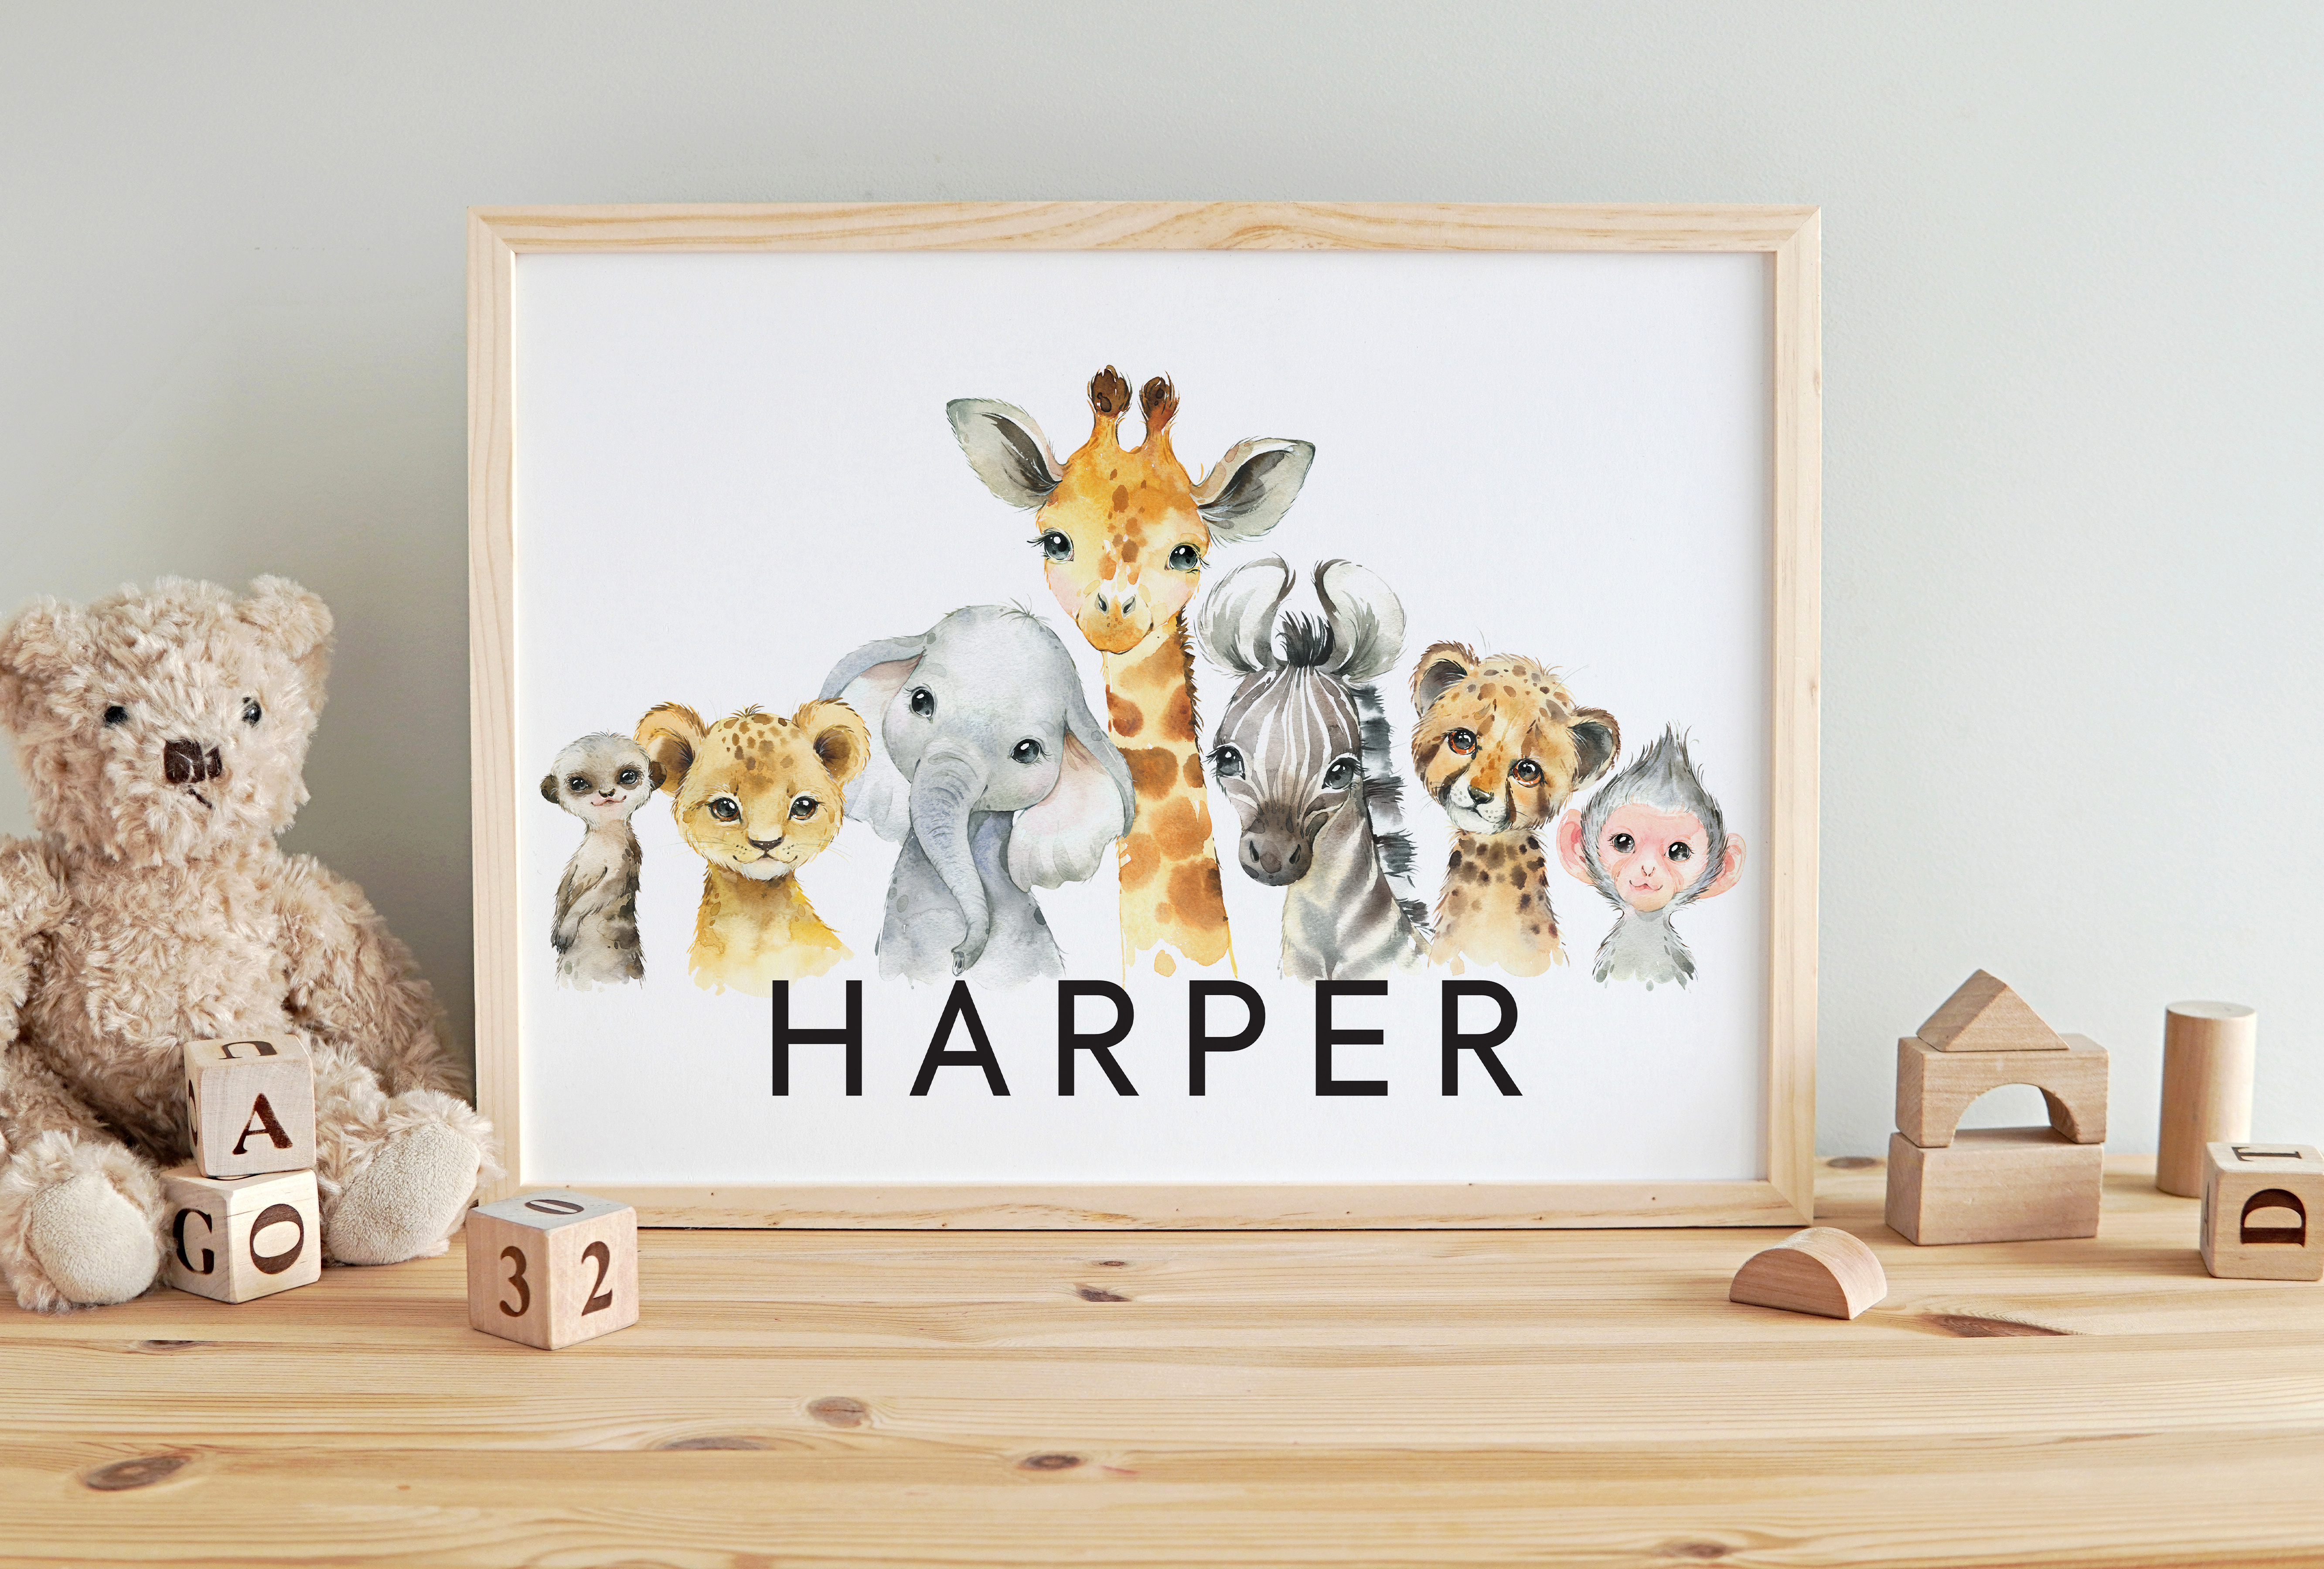 Nursery Prints and Gifts collection